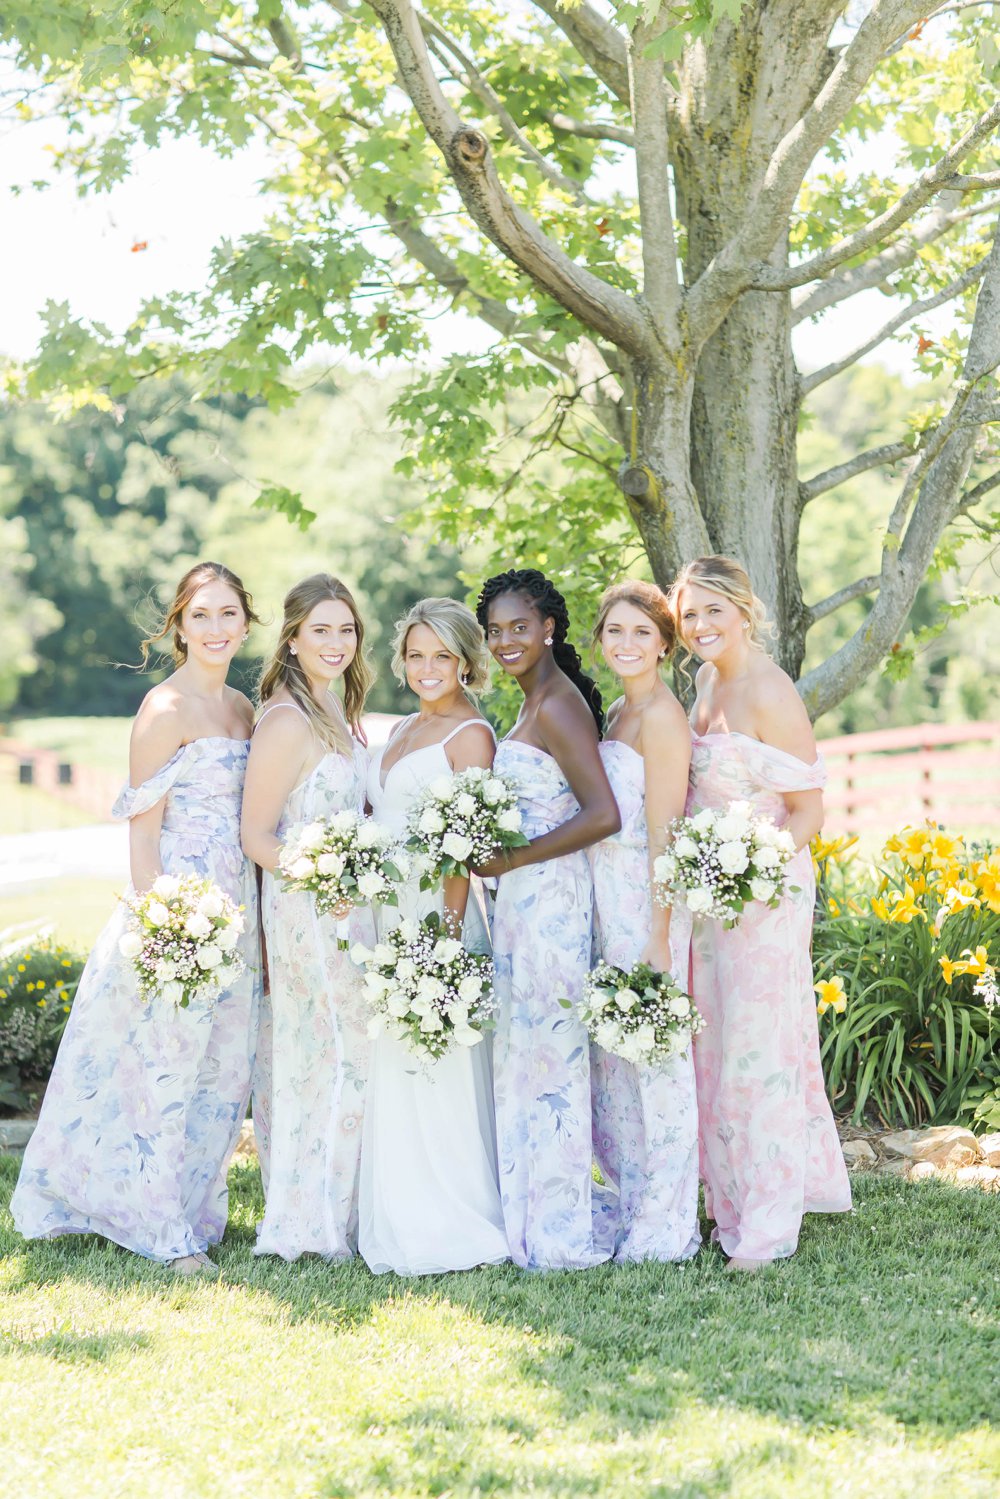 Long off the shoulder floral bridesmaid dresses in light blue and blush colors paired with white flowers bouquets